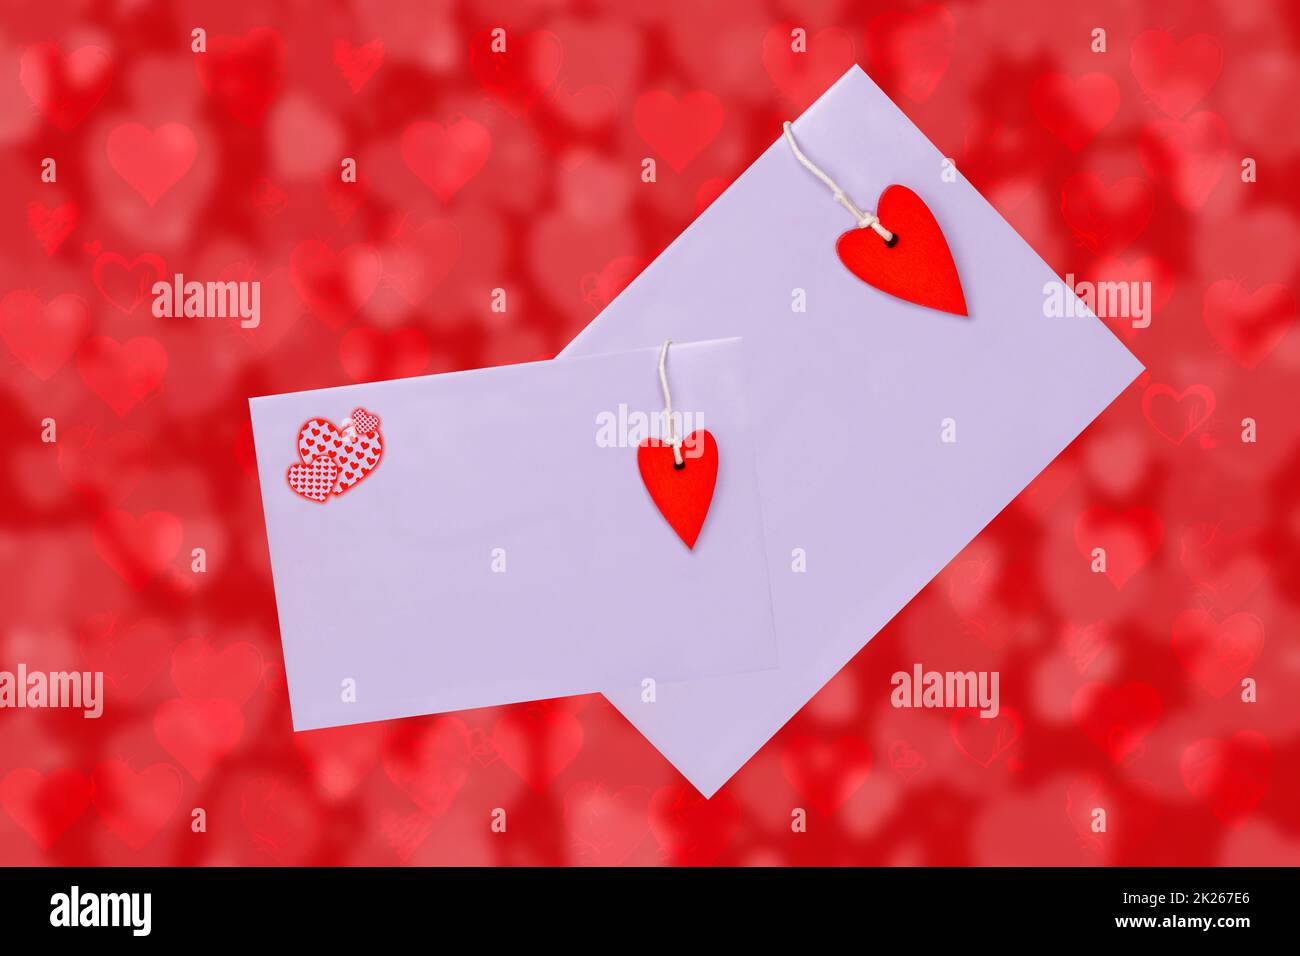 Happy Valentine or Mothers Day card template. 3D illustration of two envelopes with red hearts made of wood over abstract red background with hearts. Space for text design. Stock Photo